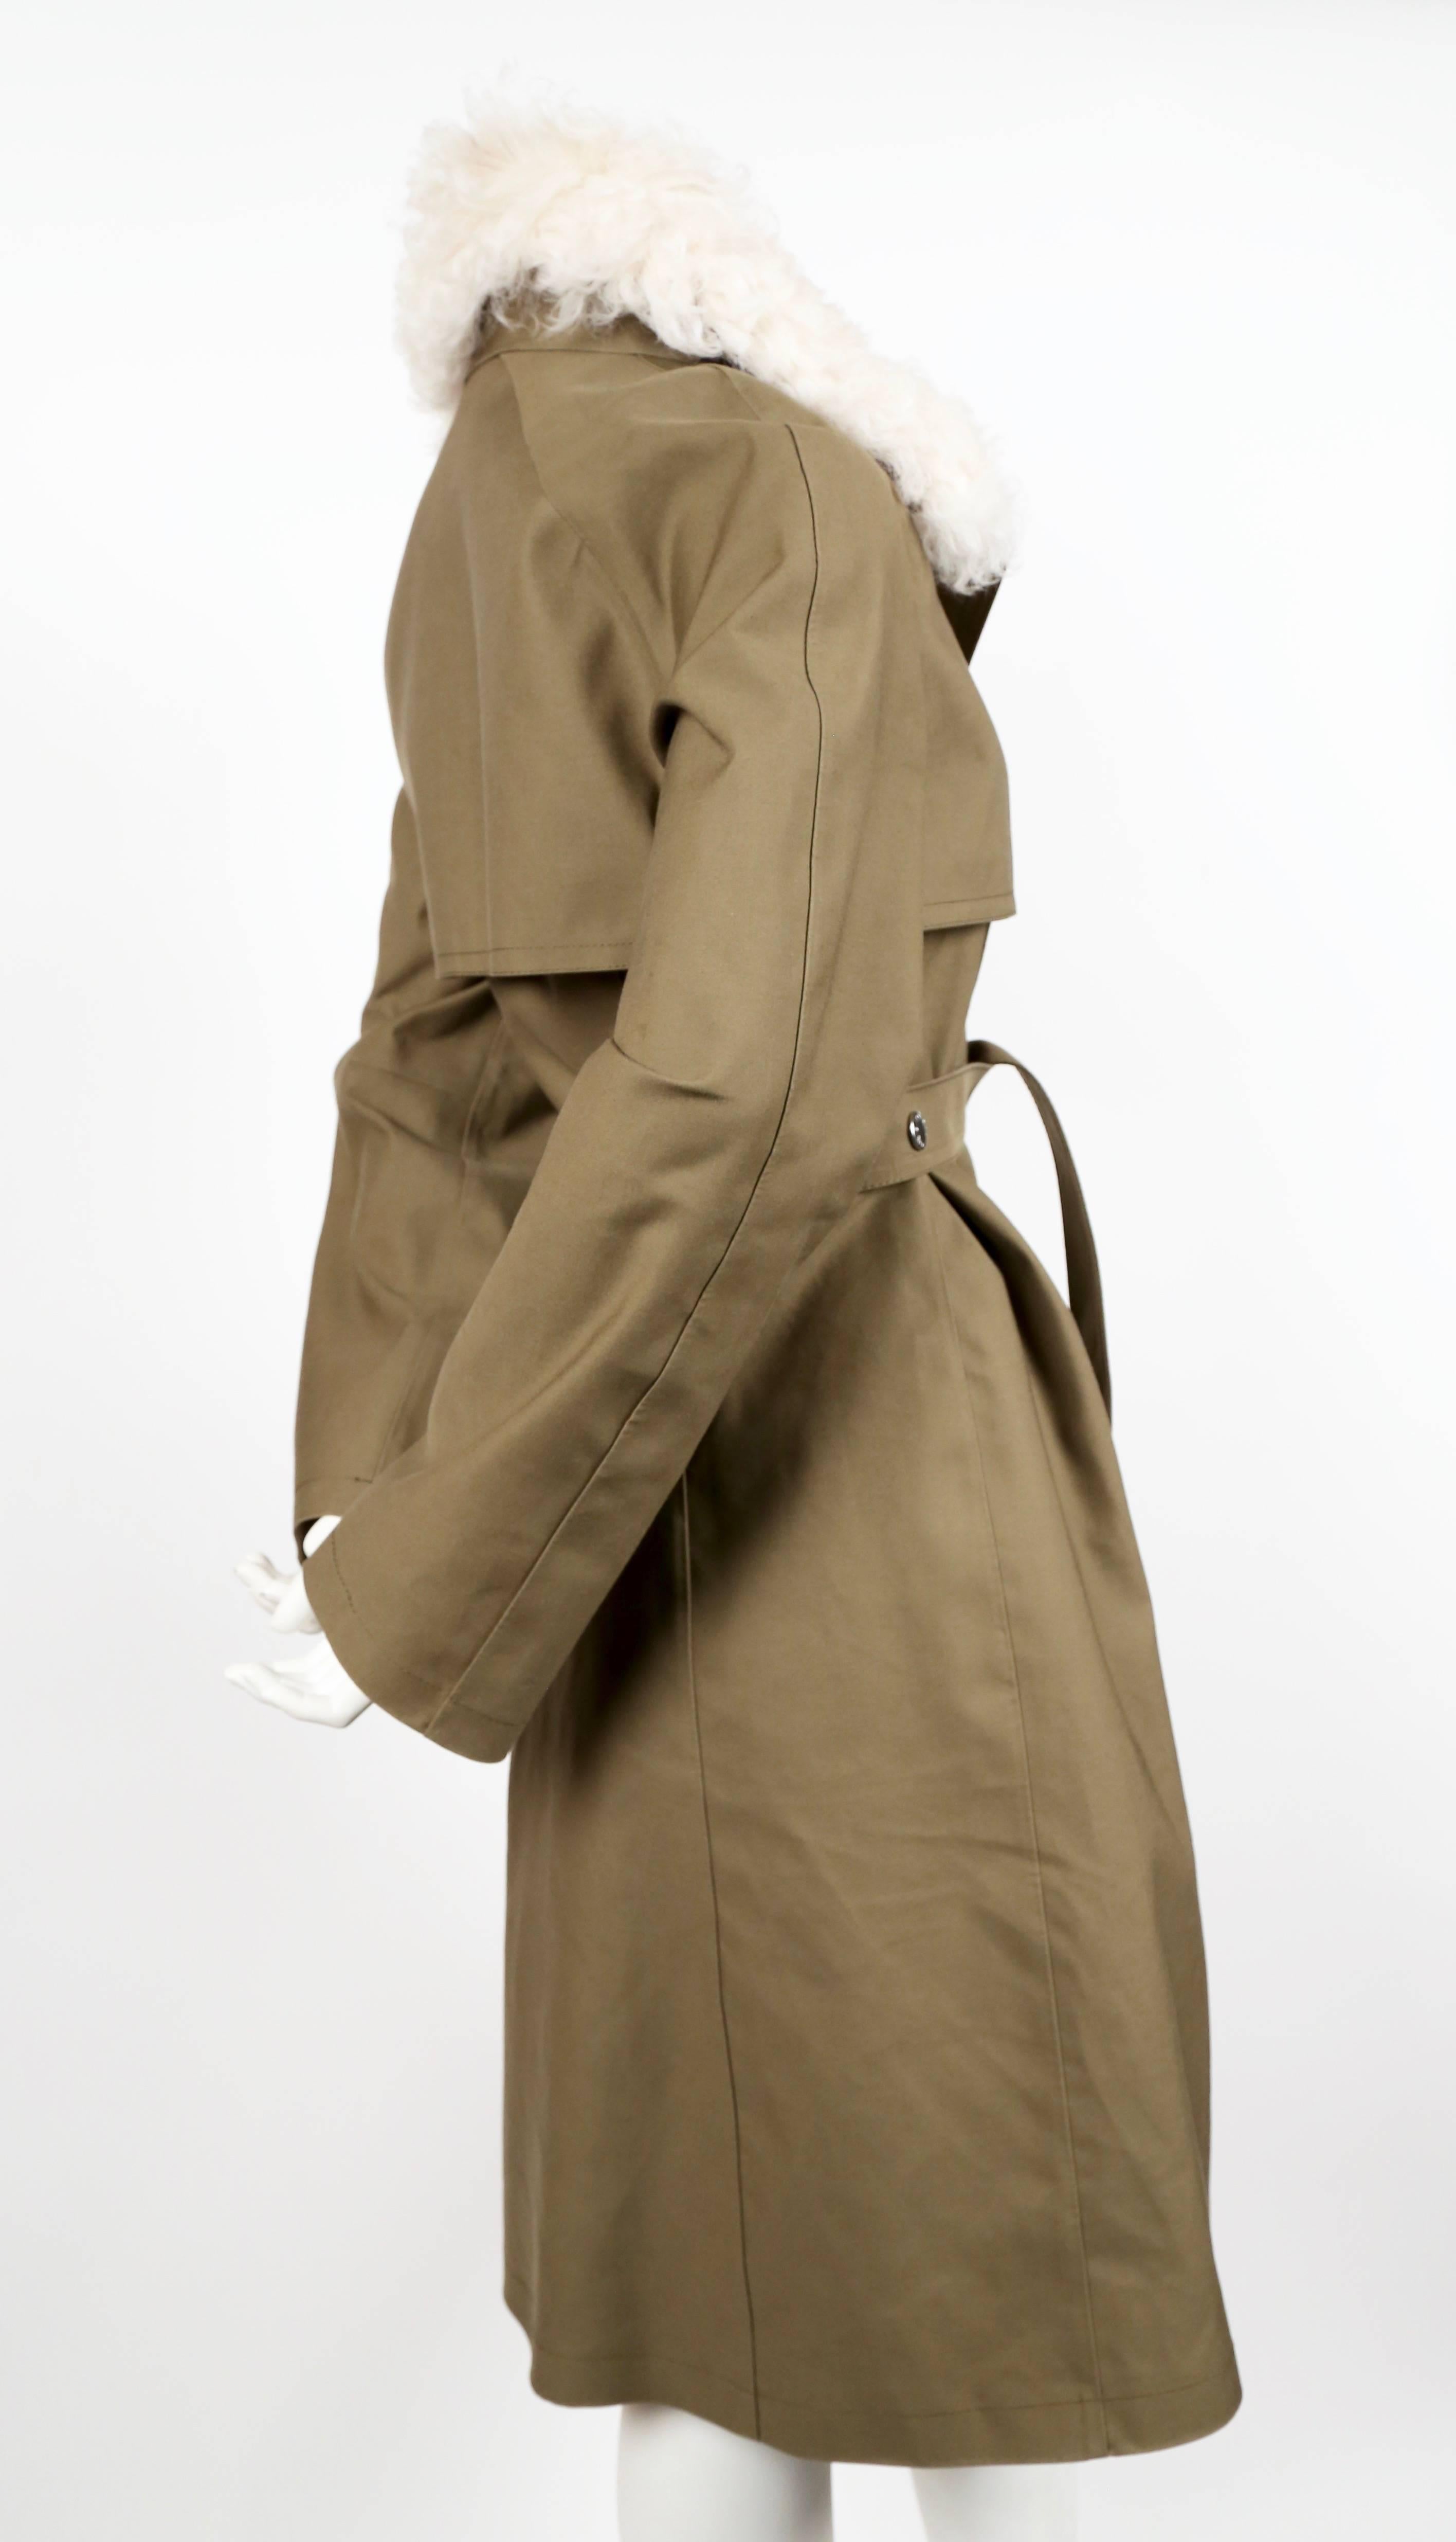 Khaki-green, water-repellent mackintosh trench coat with belt and removable curly lamb fur collar designed by Nicolas Ghesquière for his first collection at Louis Vuitton dating to 2014. French size 38. Approximate measurements: shoulder 16",